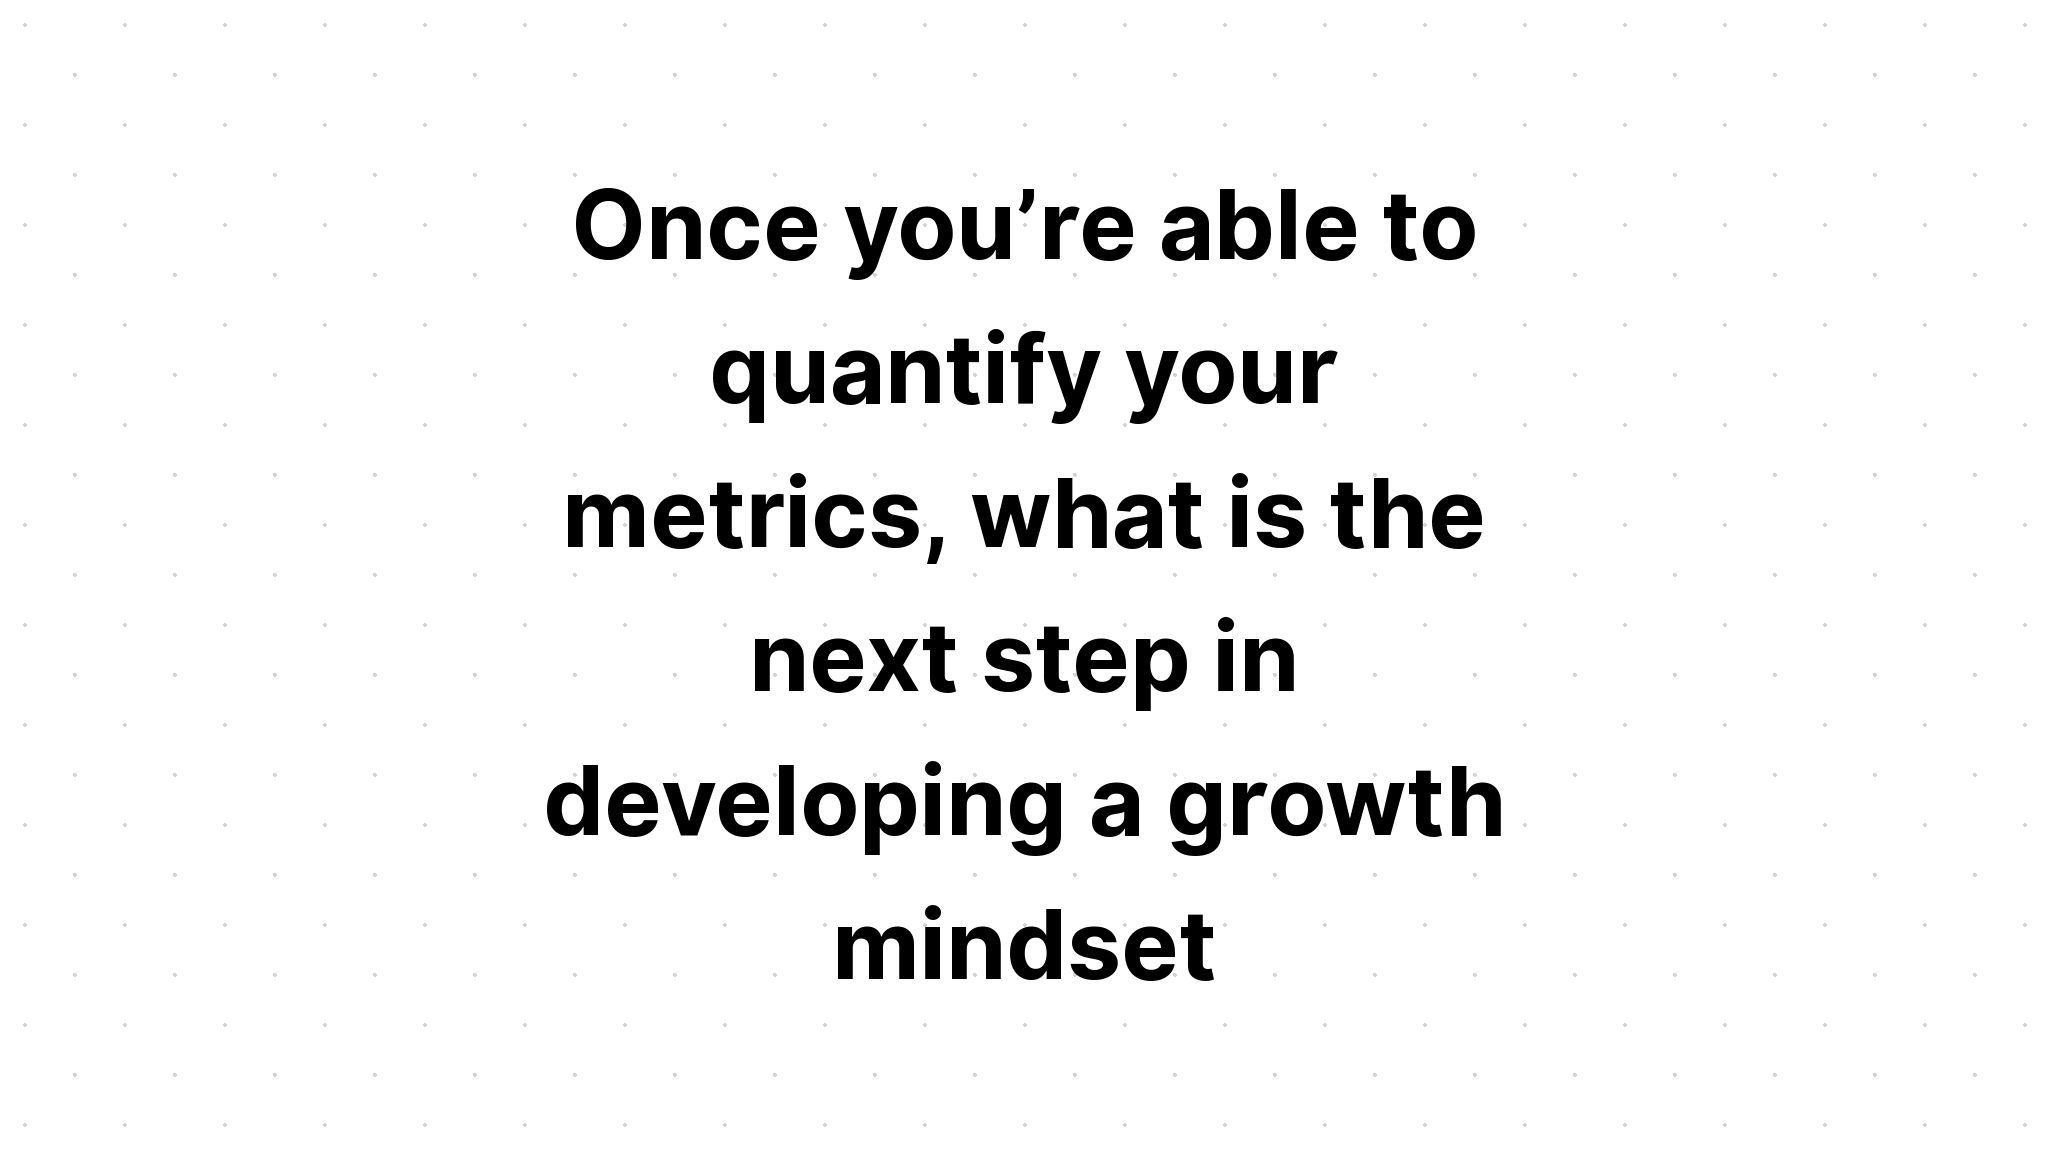 once-you-re-able-to-quantify-your-metrics-what-is-the-next-step-in-developing-a-growth-mindset